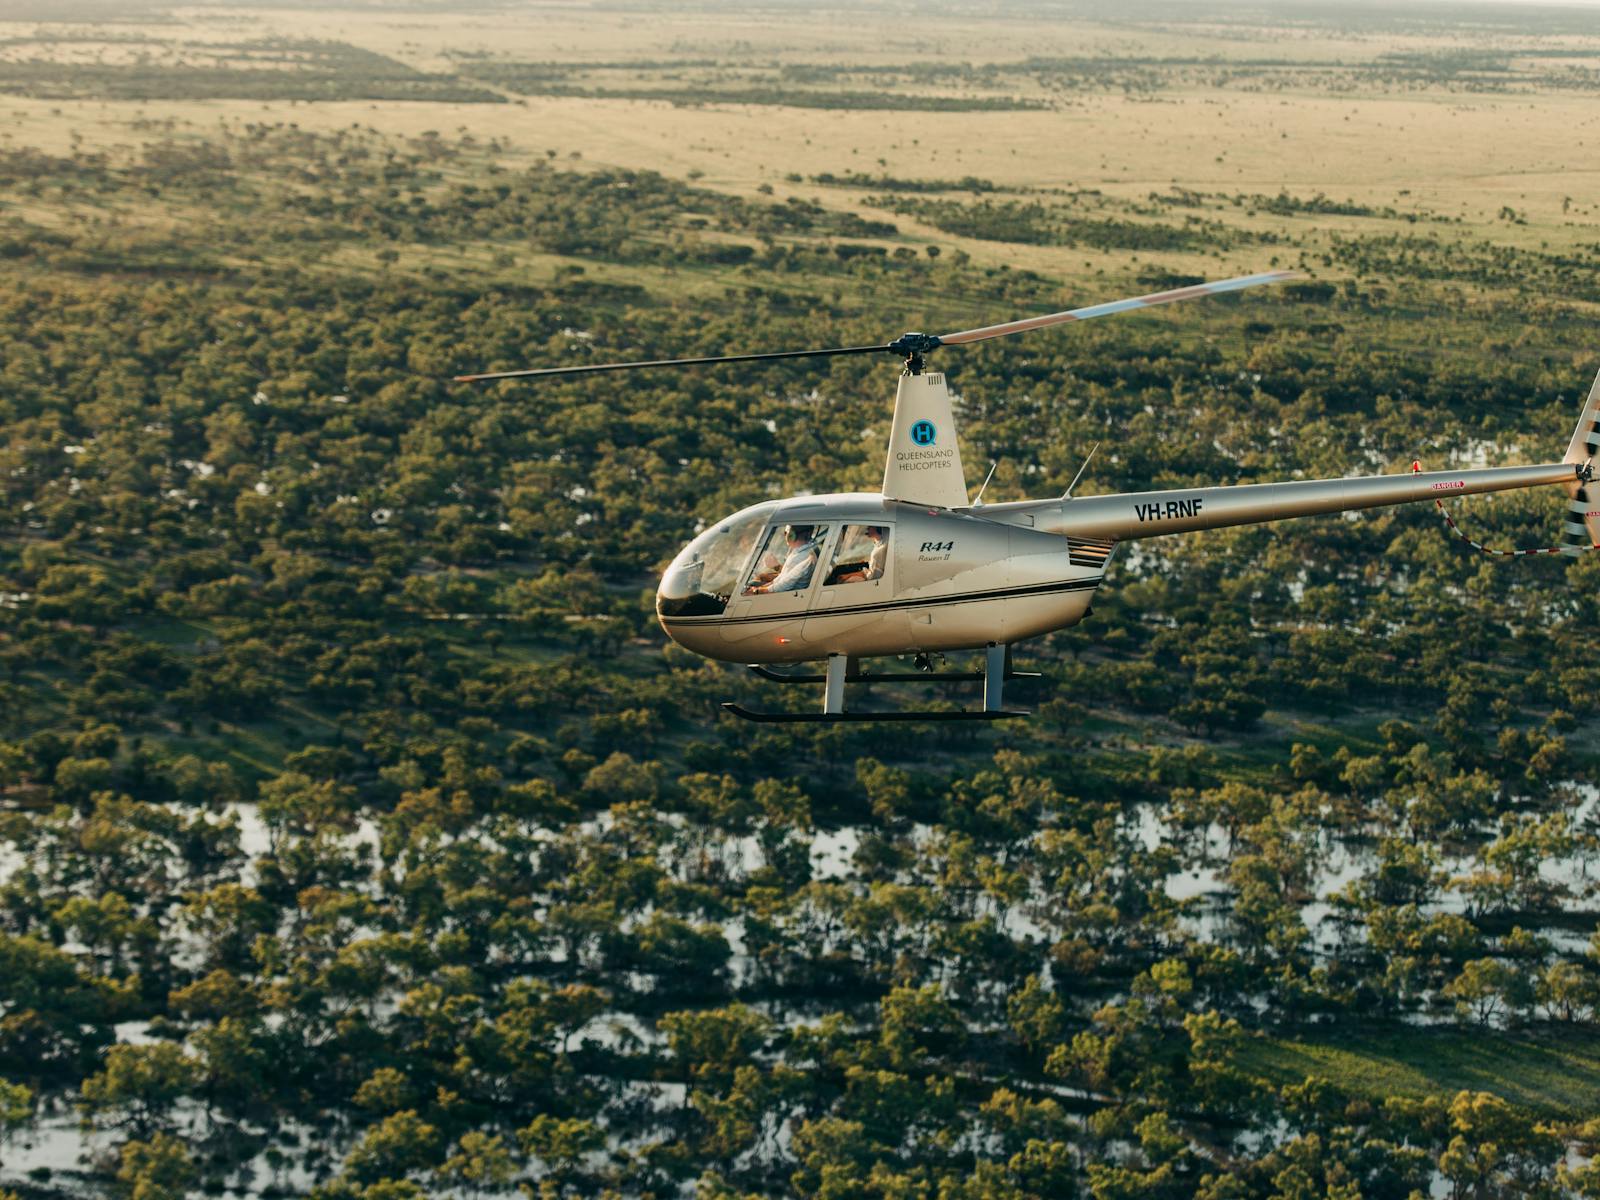 R44 helicopters flying over channel country